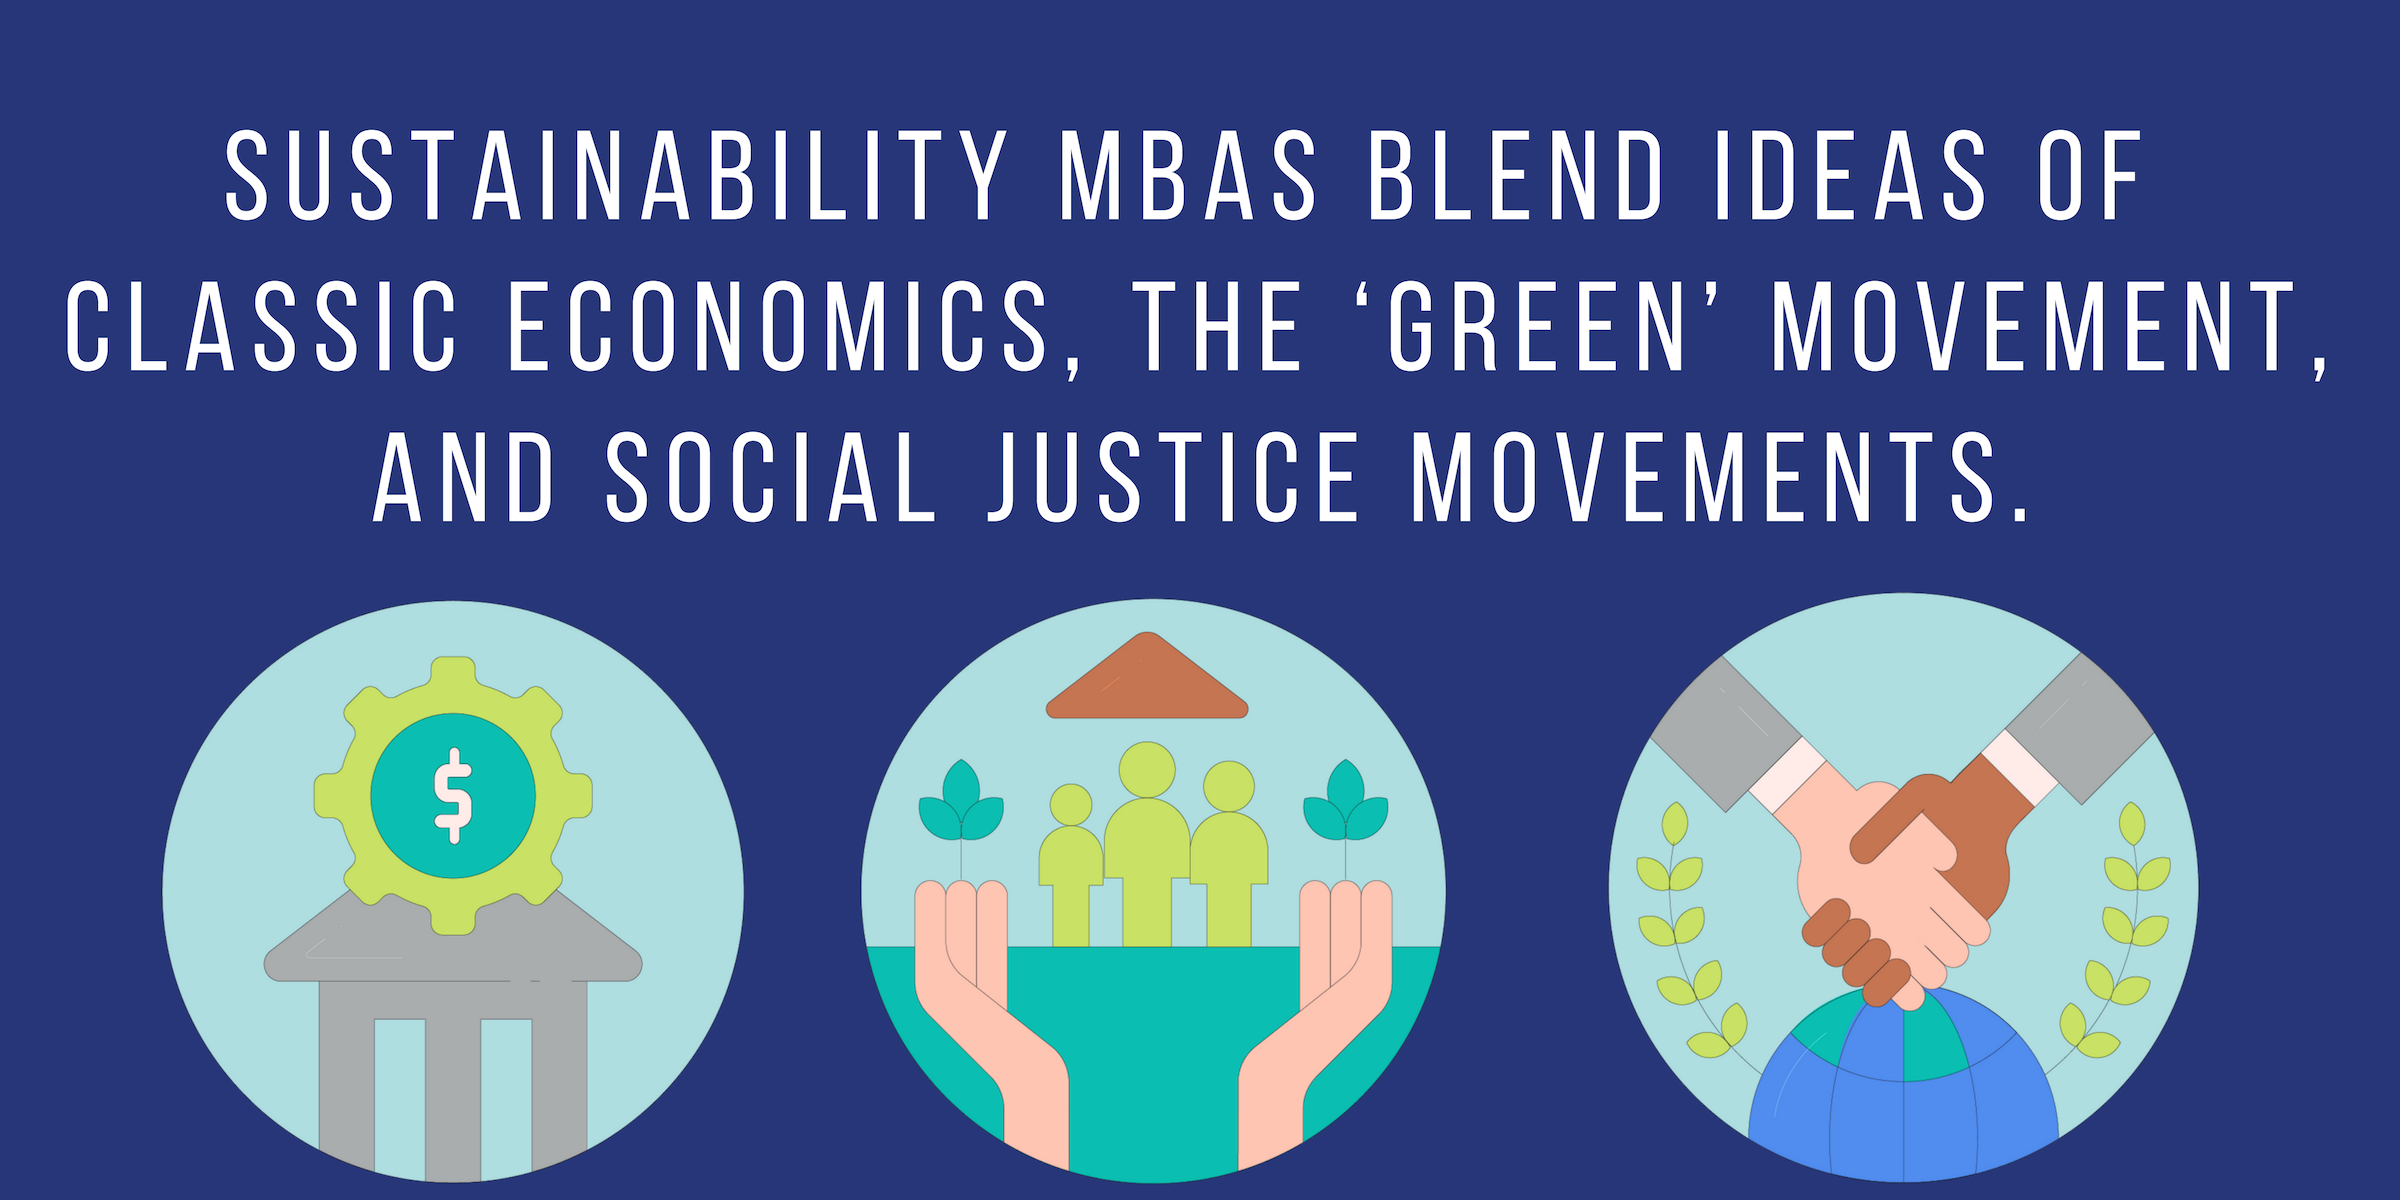 Sustainability MBAs blend ideas of classical economics, the 'green' movement, and social justice movements.